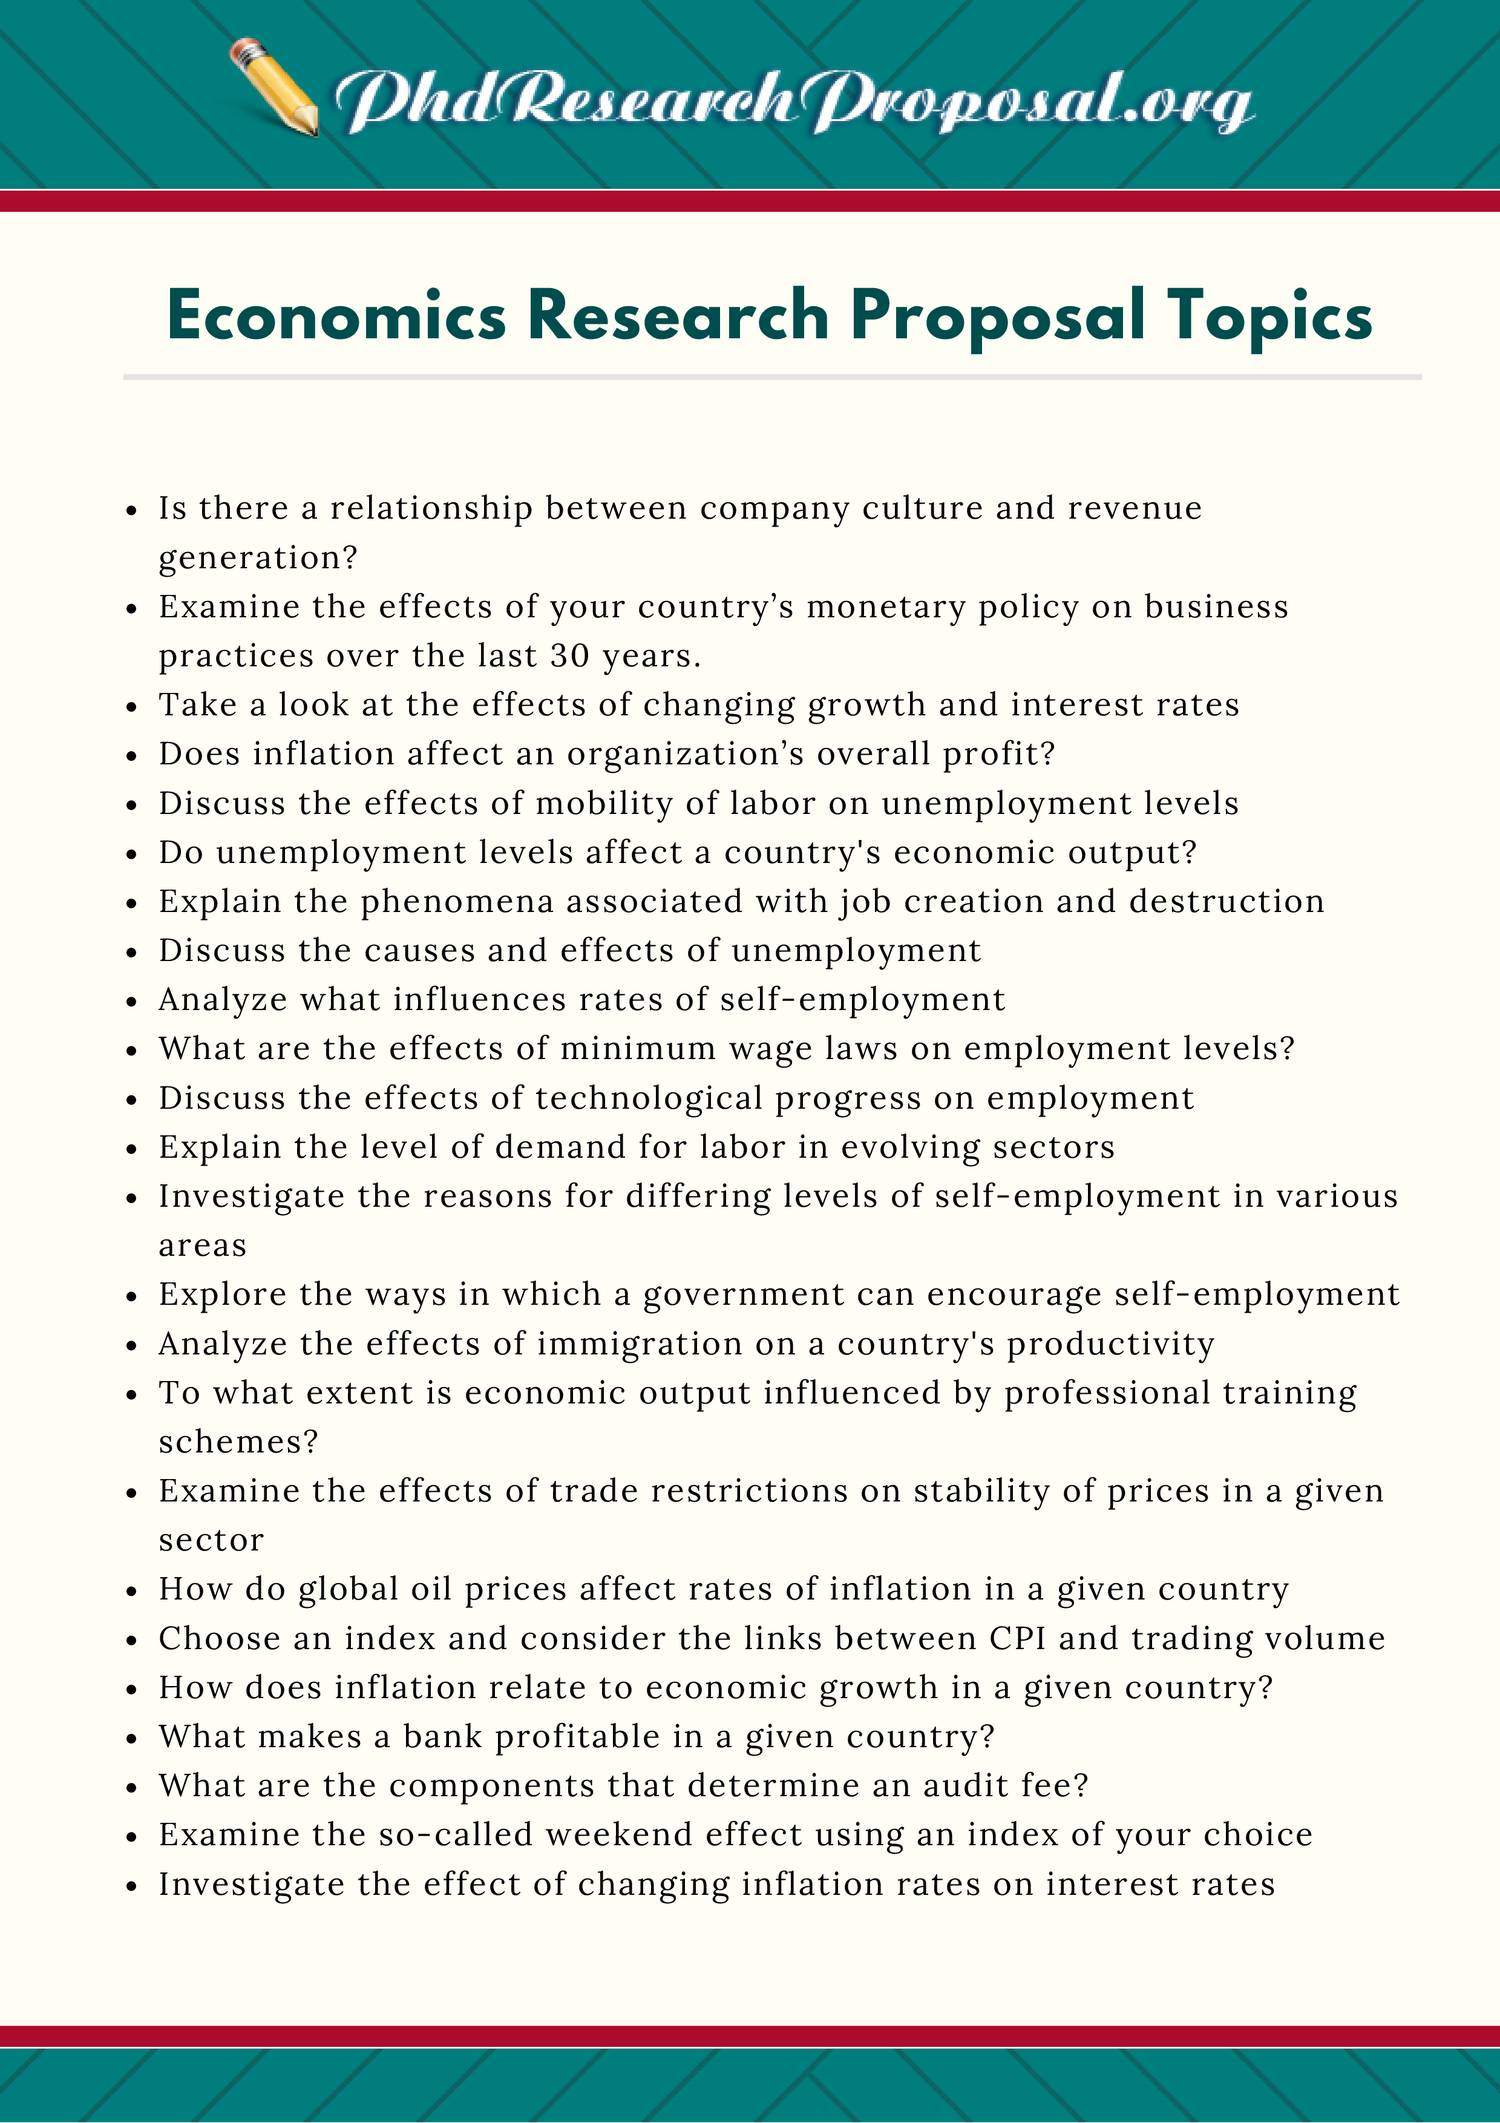 list of economic research topic